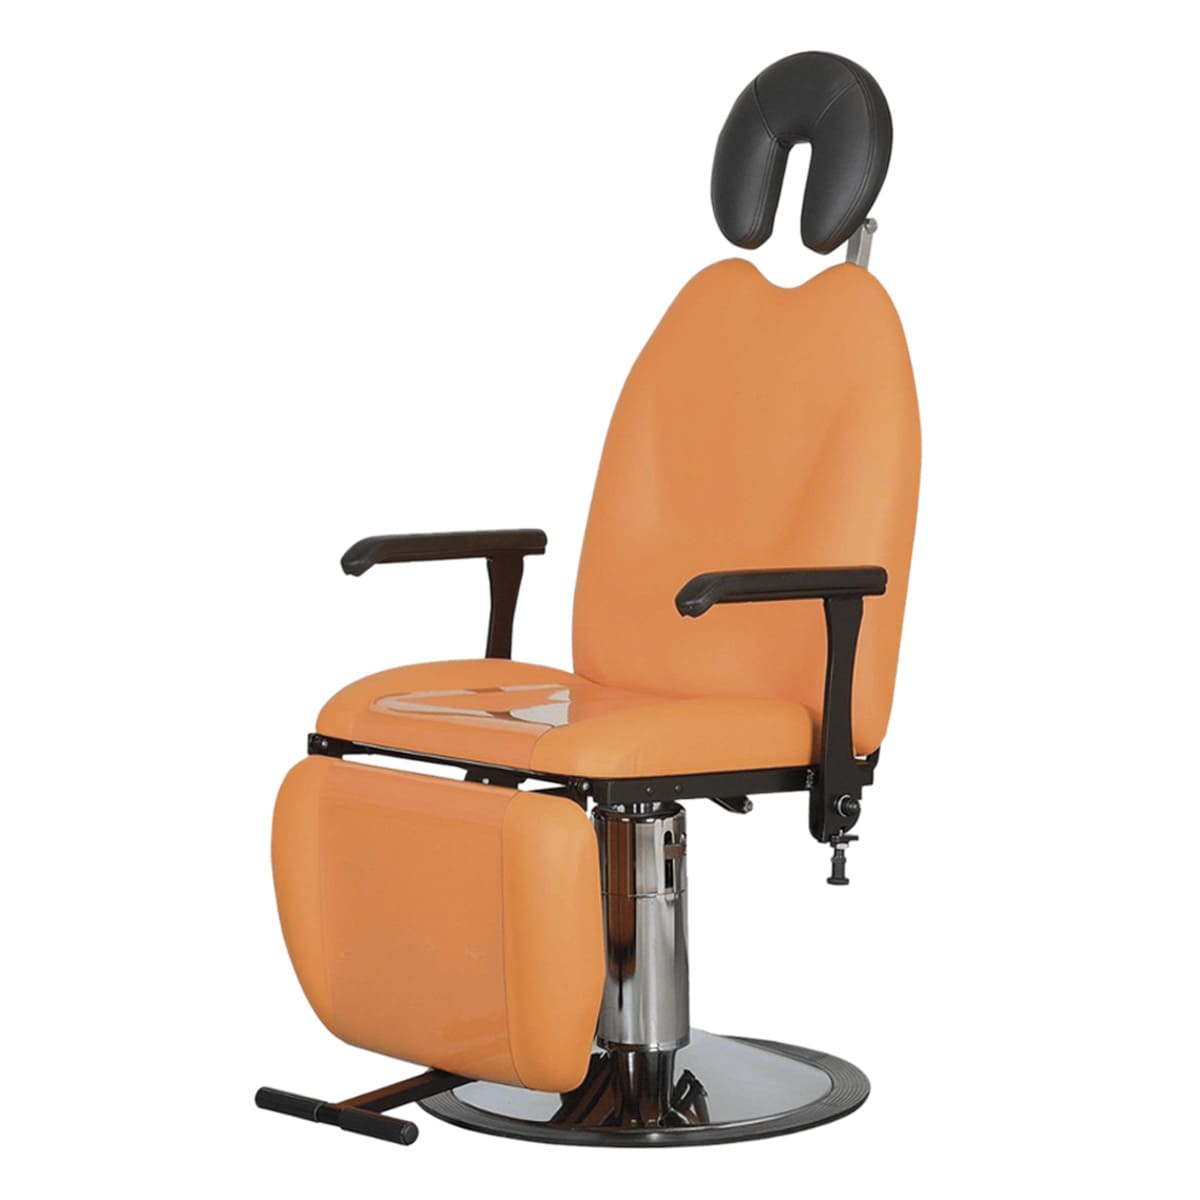 ENT chair height 50cm, 3 sections, non-rotative